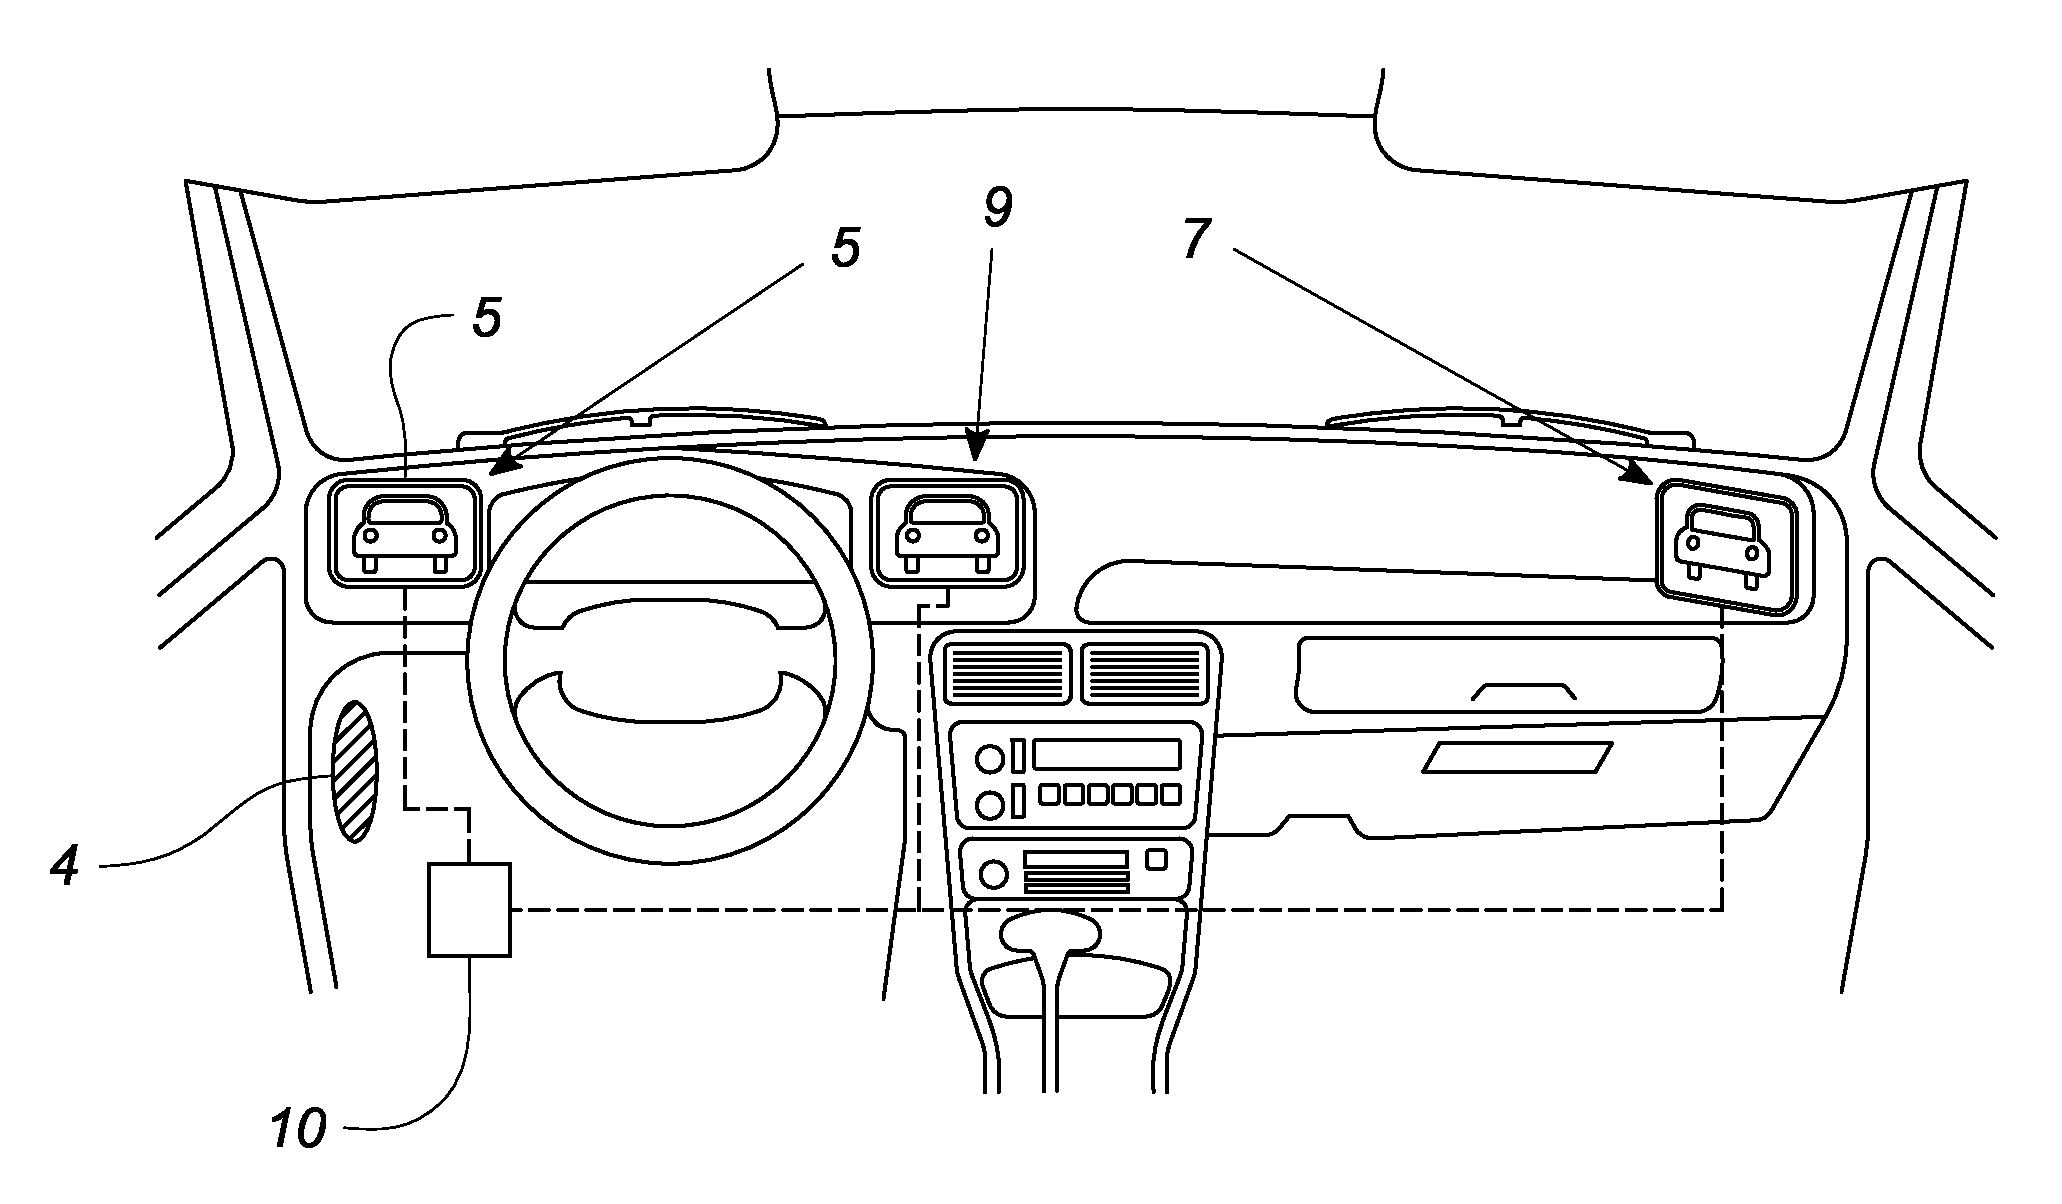 Peripheral viewing system for a vehicle